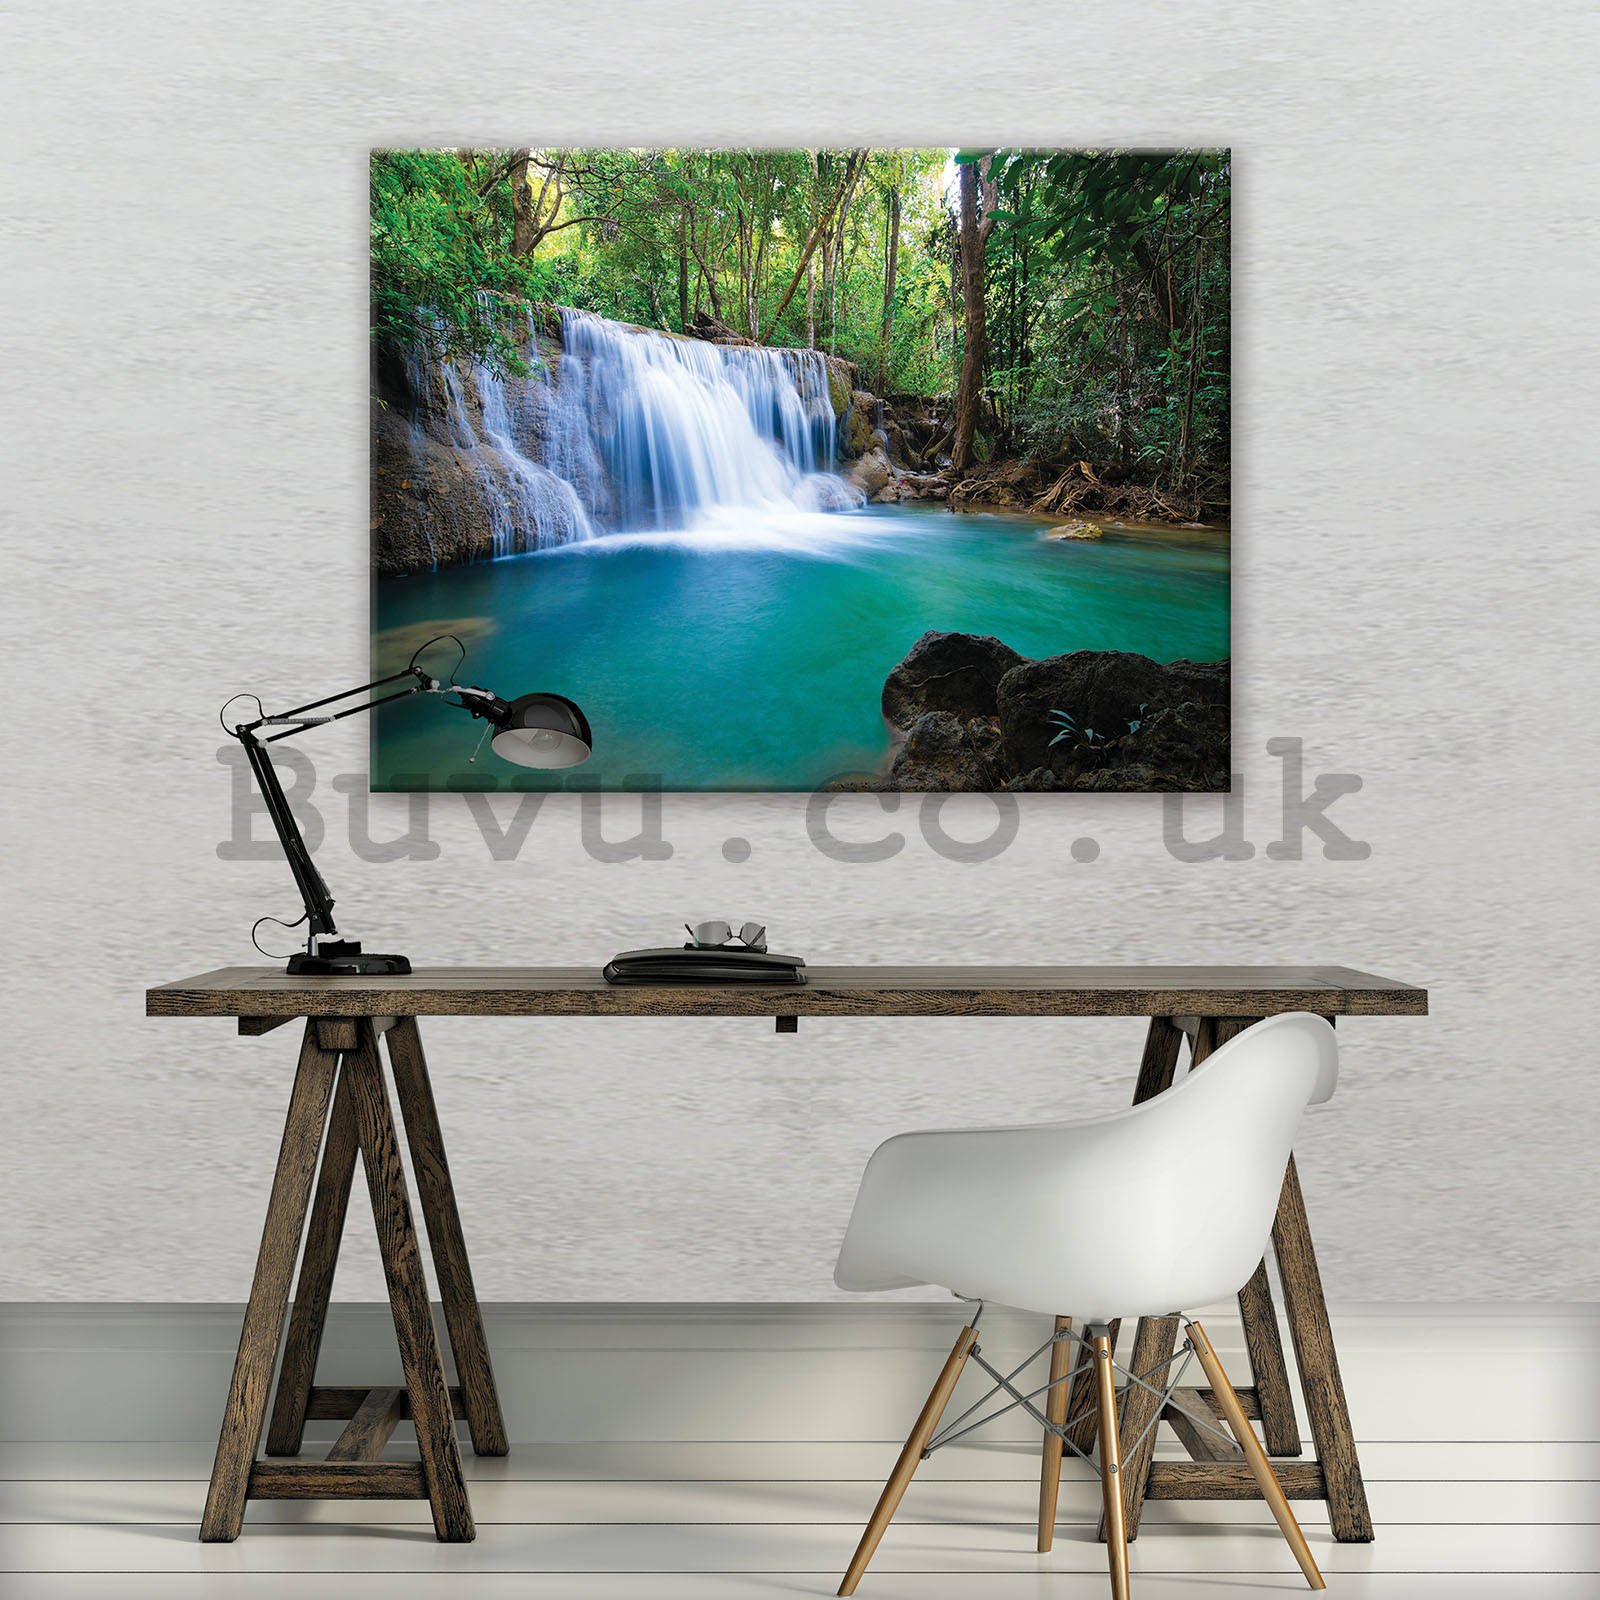 Painting on canvas: Waterfall (4) - 100x75 cm